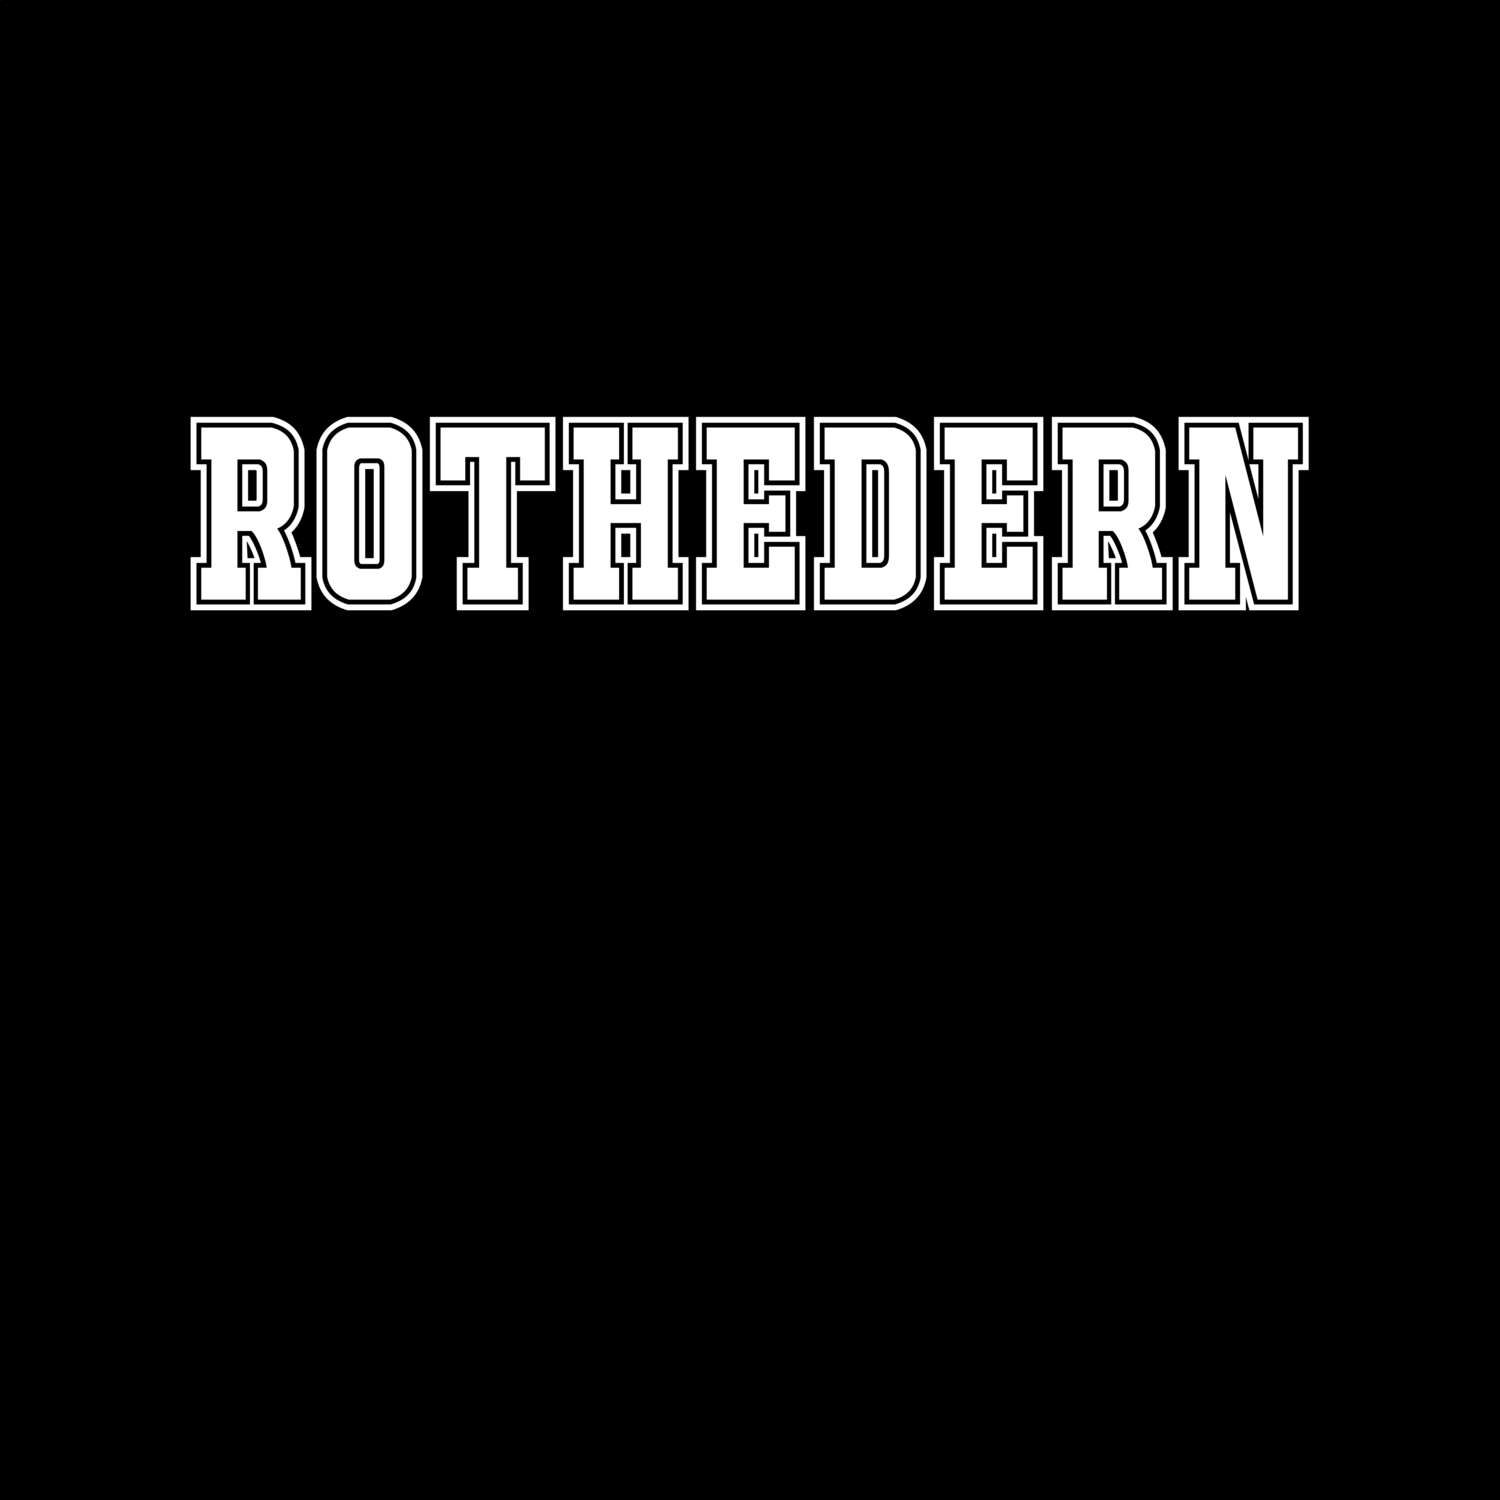 Rothedern T-Shirt »Classic«